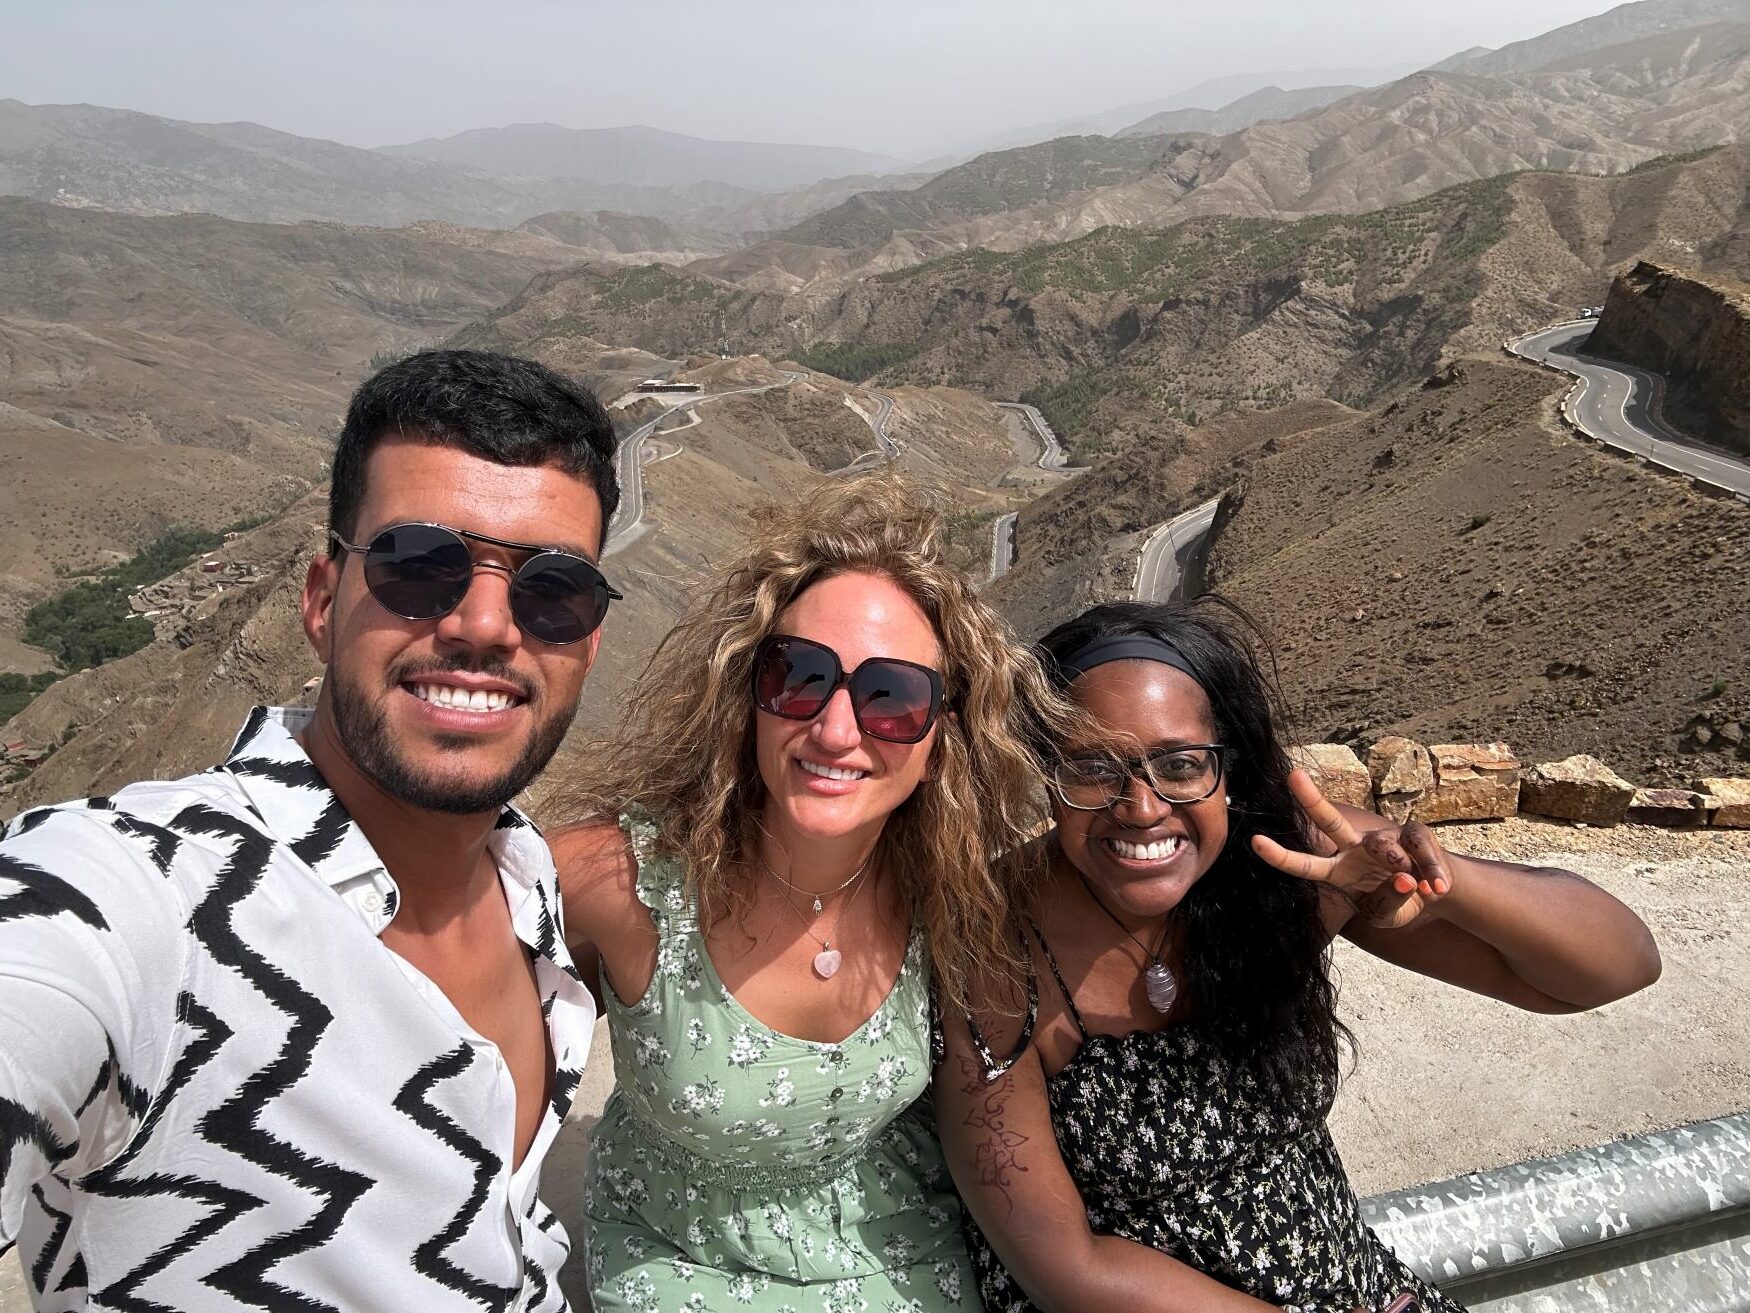 Those seeking luxury escapes bucket list ideas for wanderlust jetsetters need to use luxury travel company Morocco Fabulous Travel. In this image are two women en route to their camel ride with their Morocco Fabulous Tour guide/personal driver. In the background are beautiful mountains.